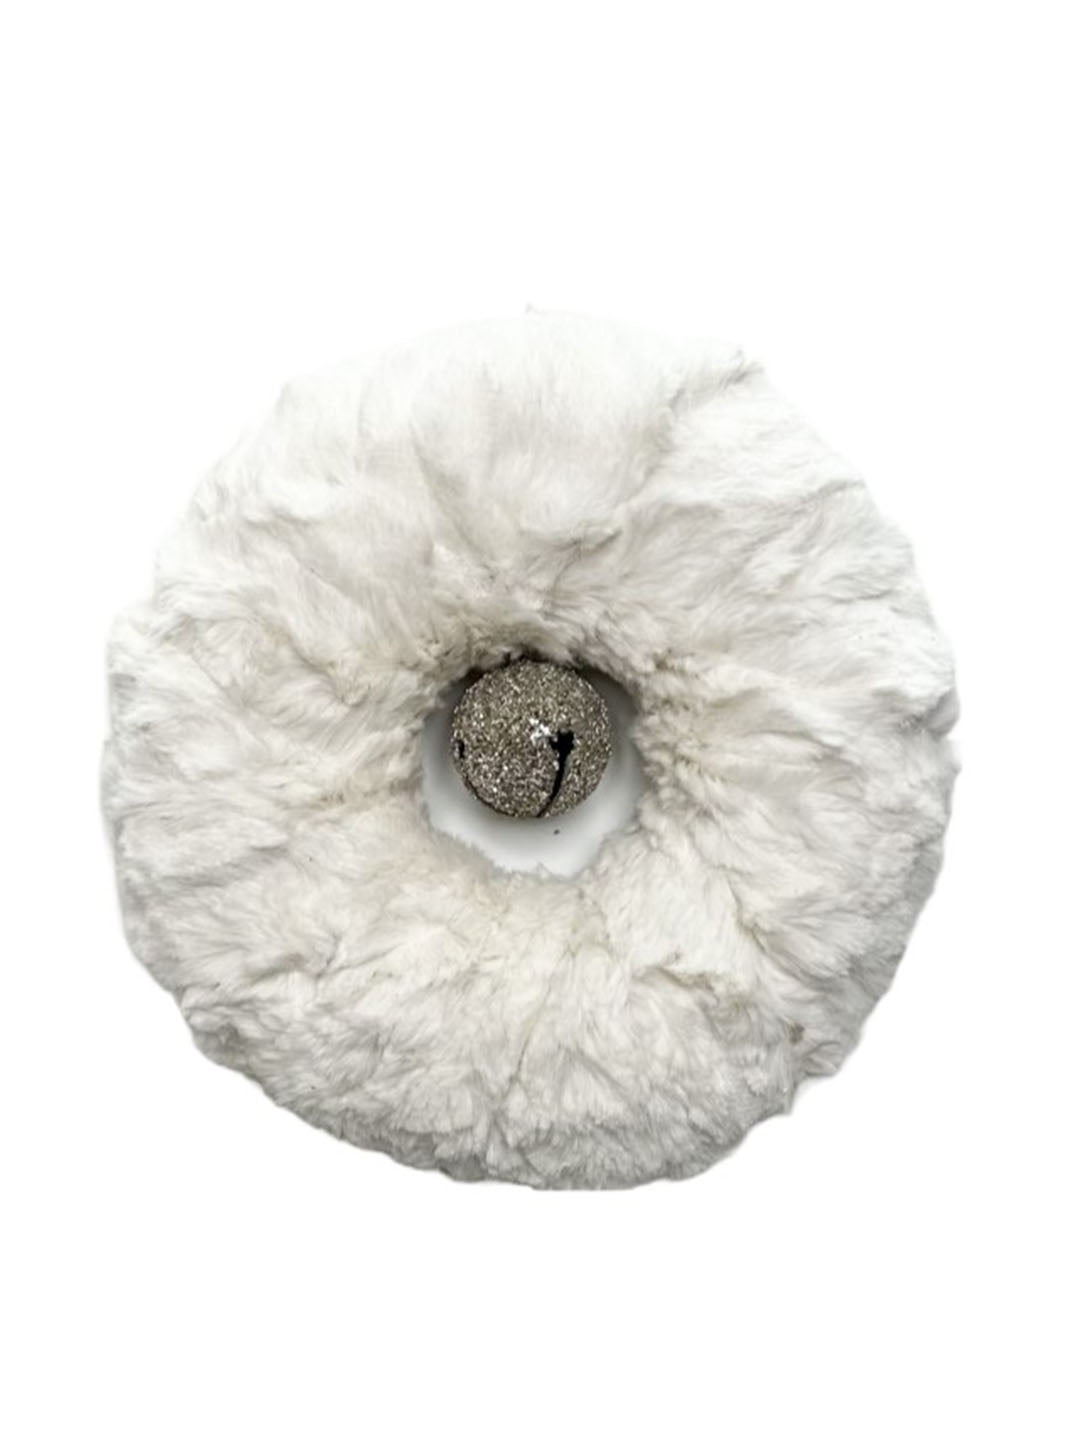 Fur Wreath with Bell -  Bisque Fur